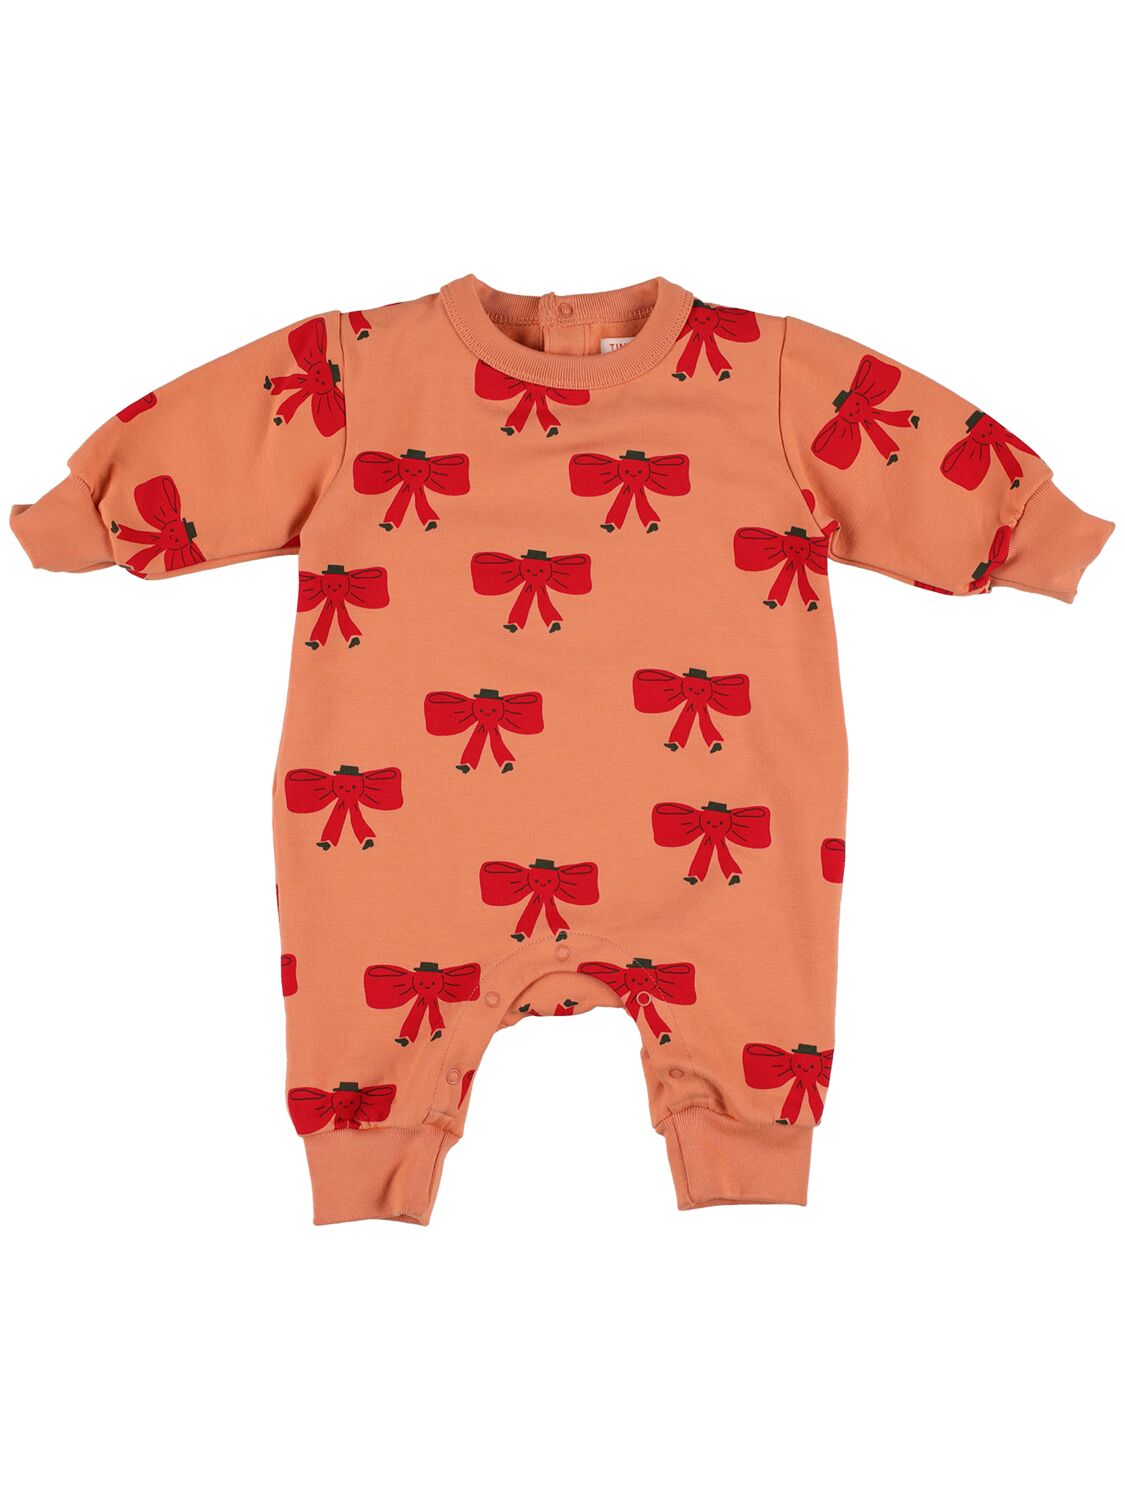 Tiny Cottons Babies' Bow Print Cotton Romper In Orange